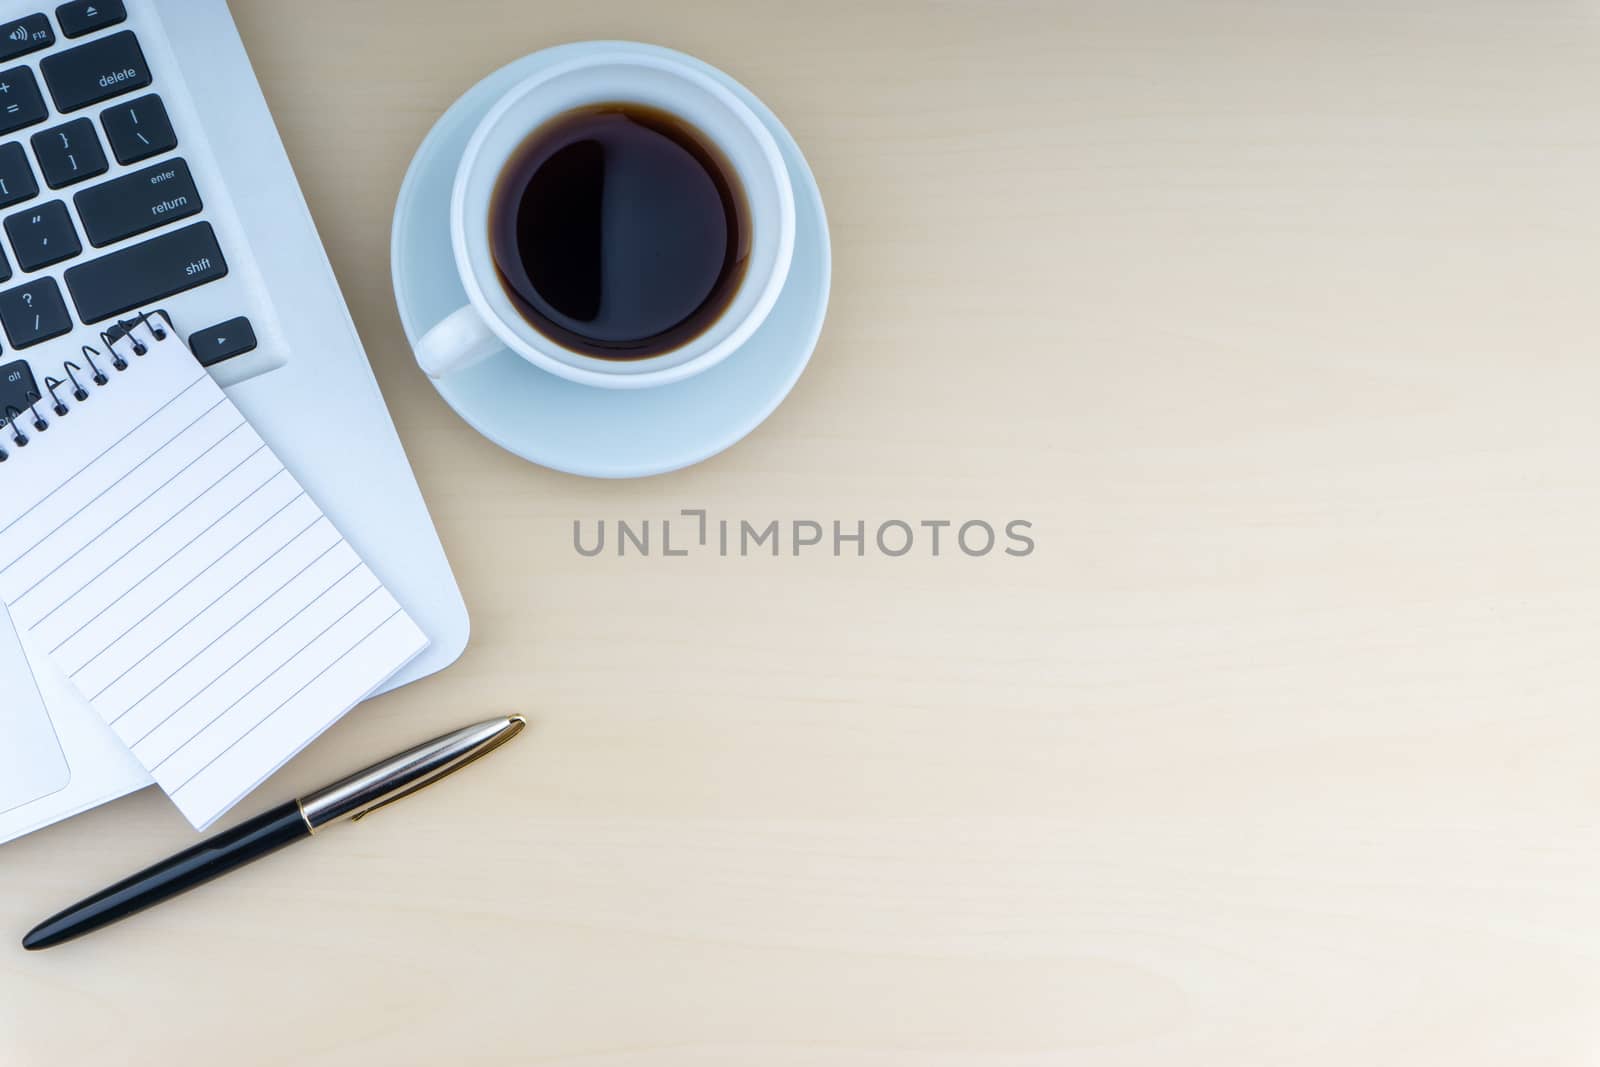 Laptop, notepad, fountain pen and cup of coffee on wooden background. Business and copy space concept.
